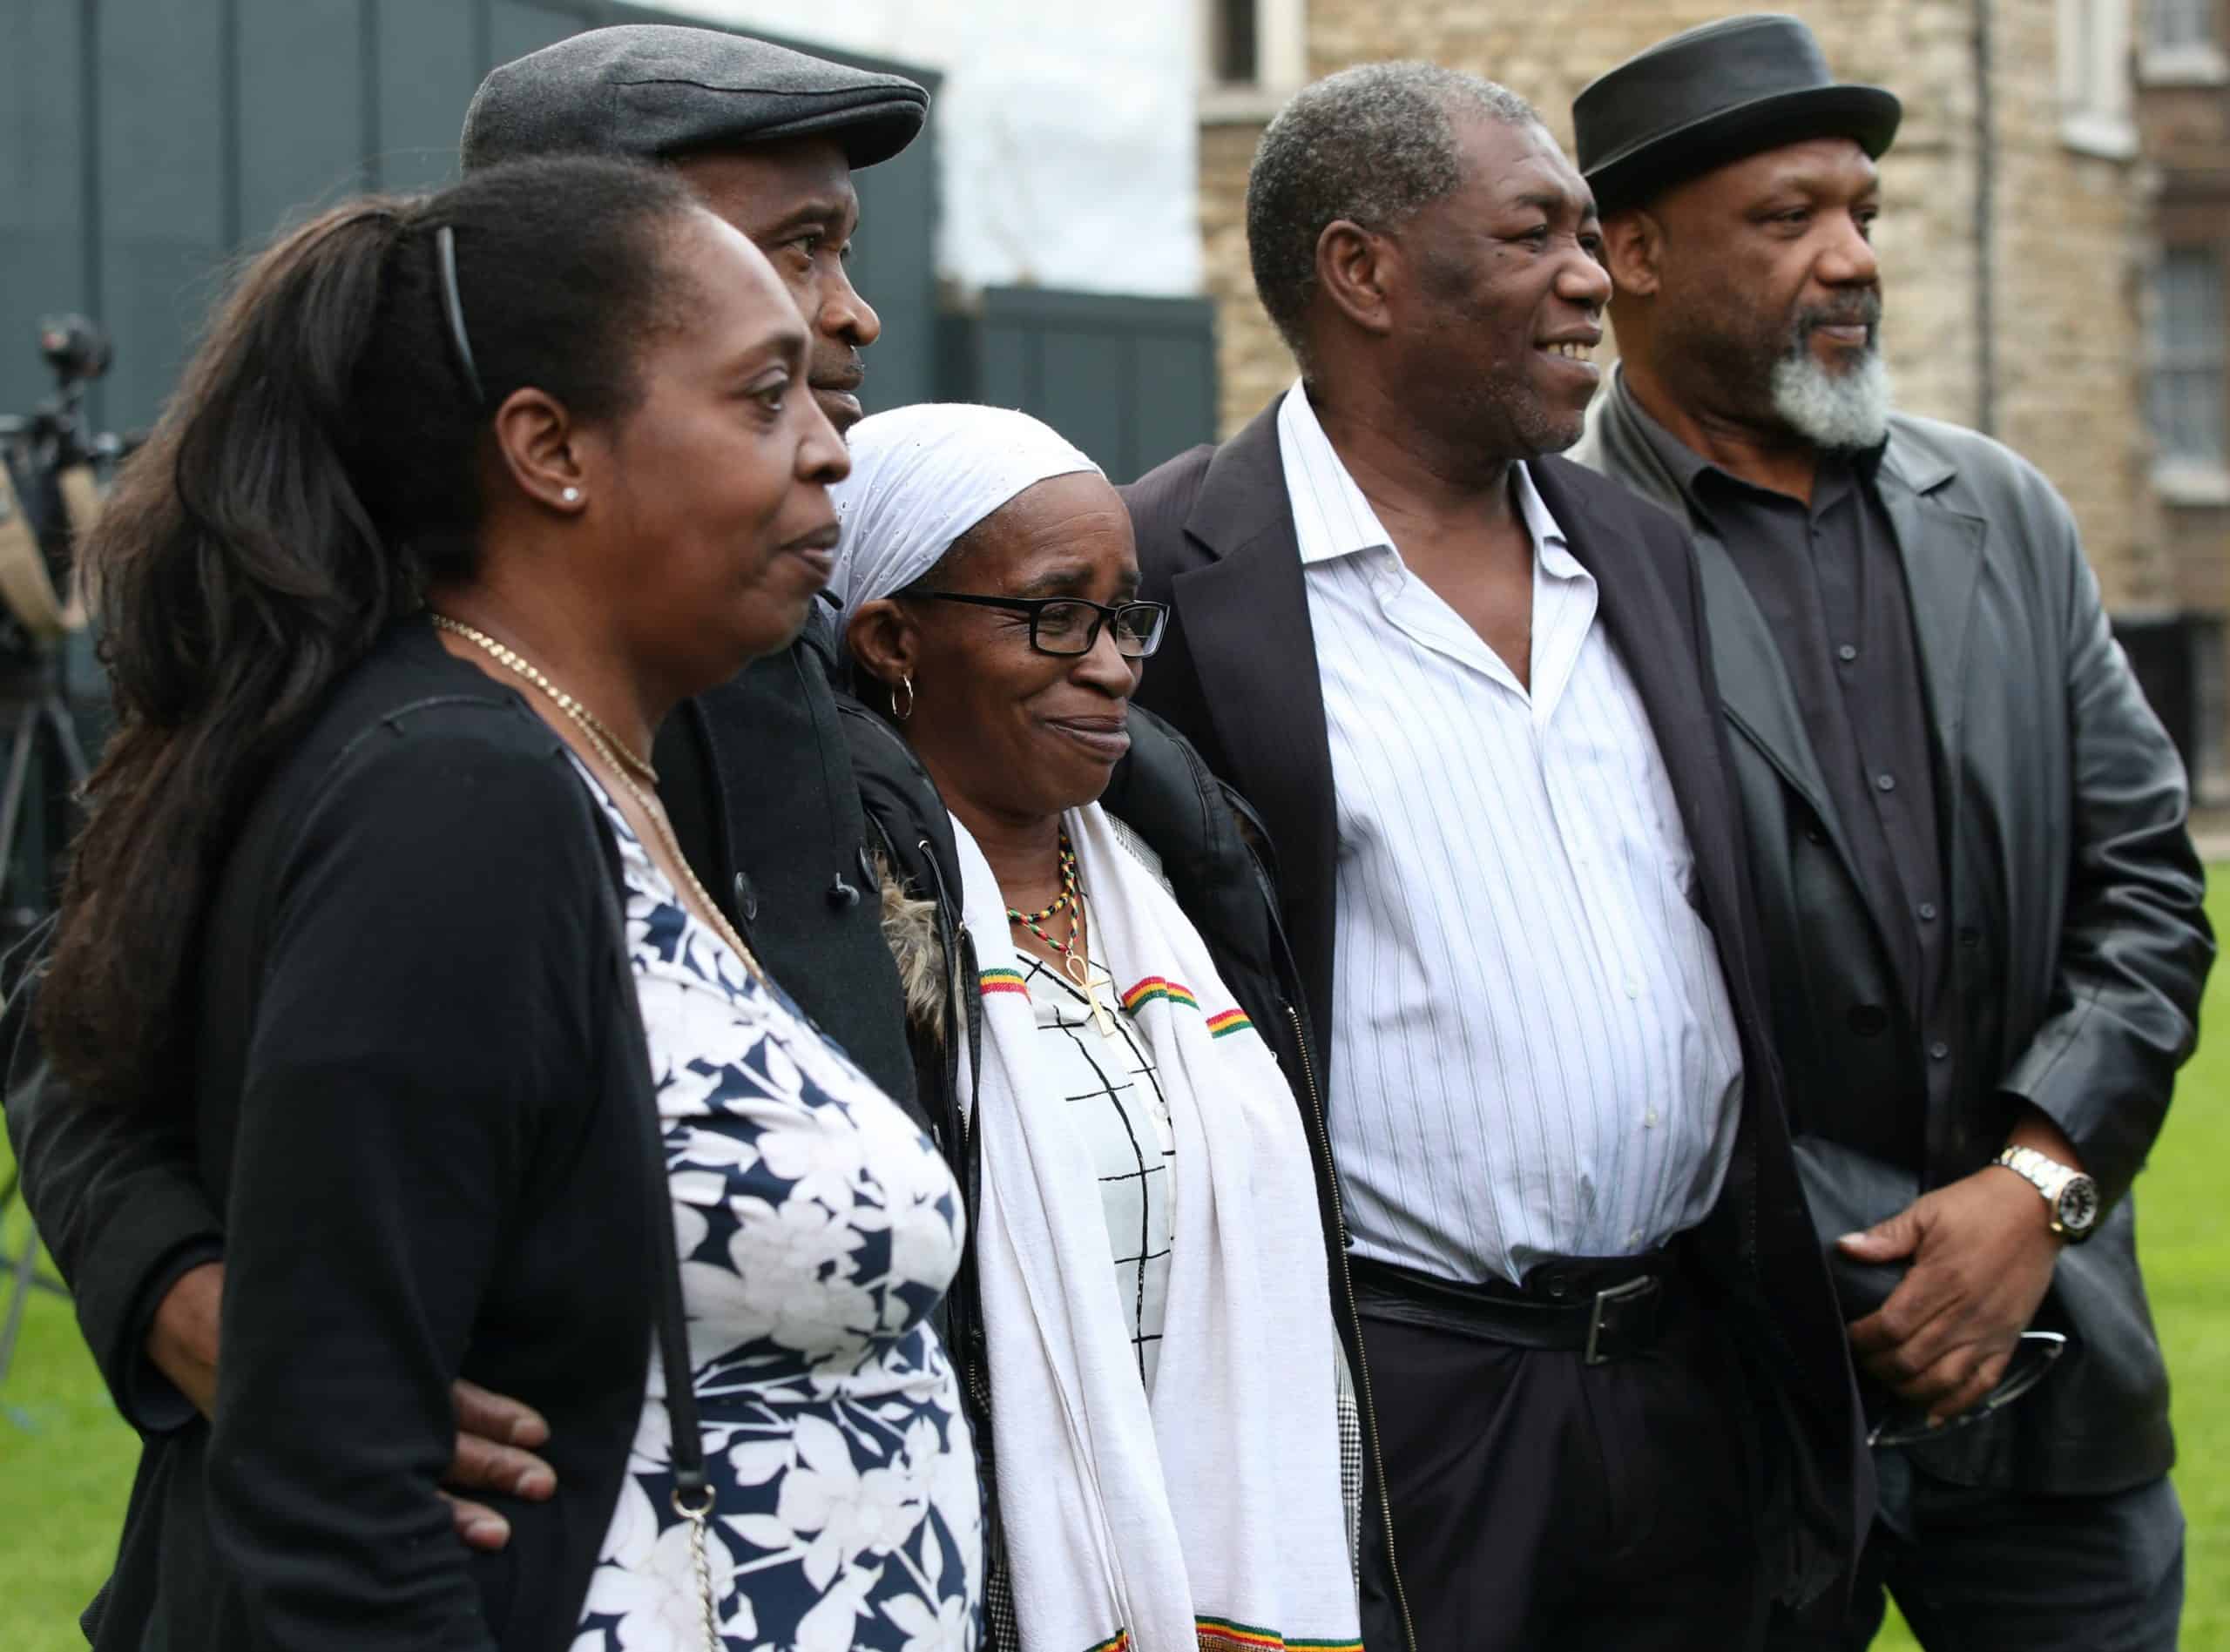 Windrush campaigner who died ‘had spirit broken by government’